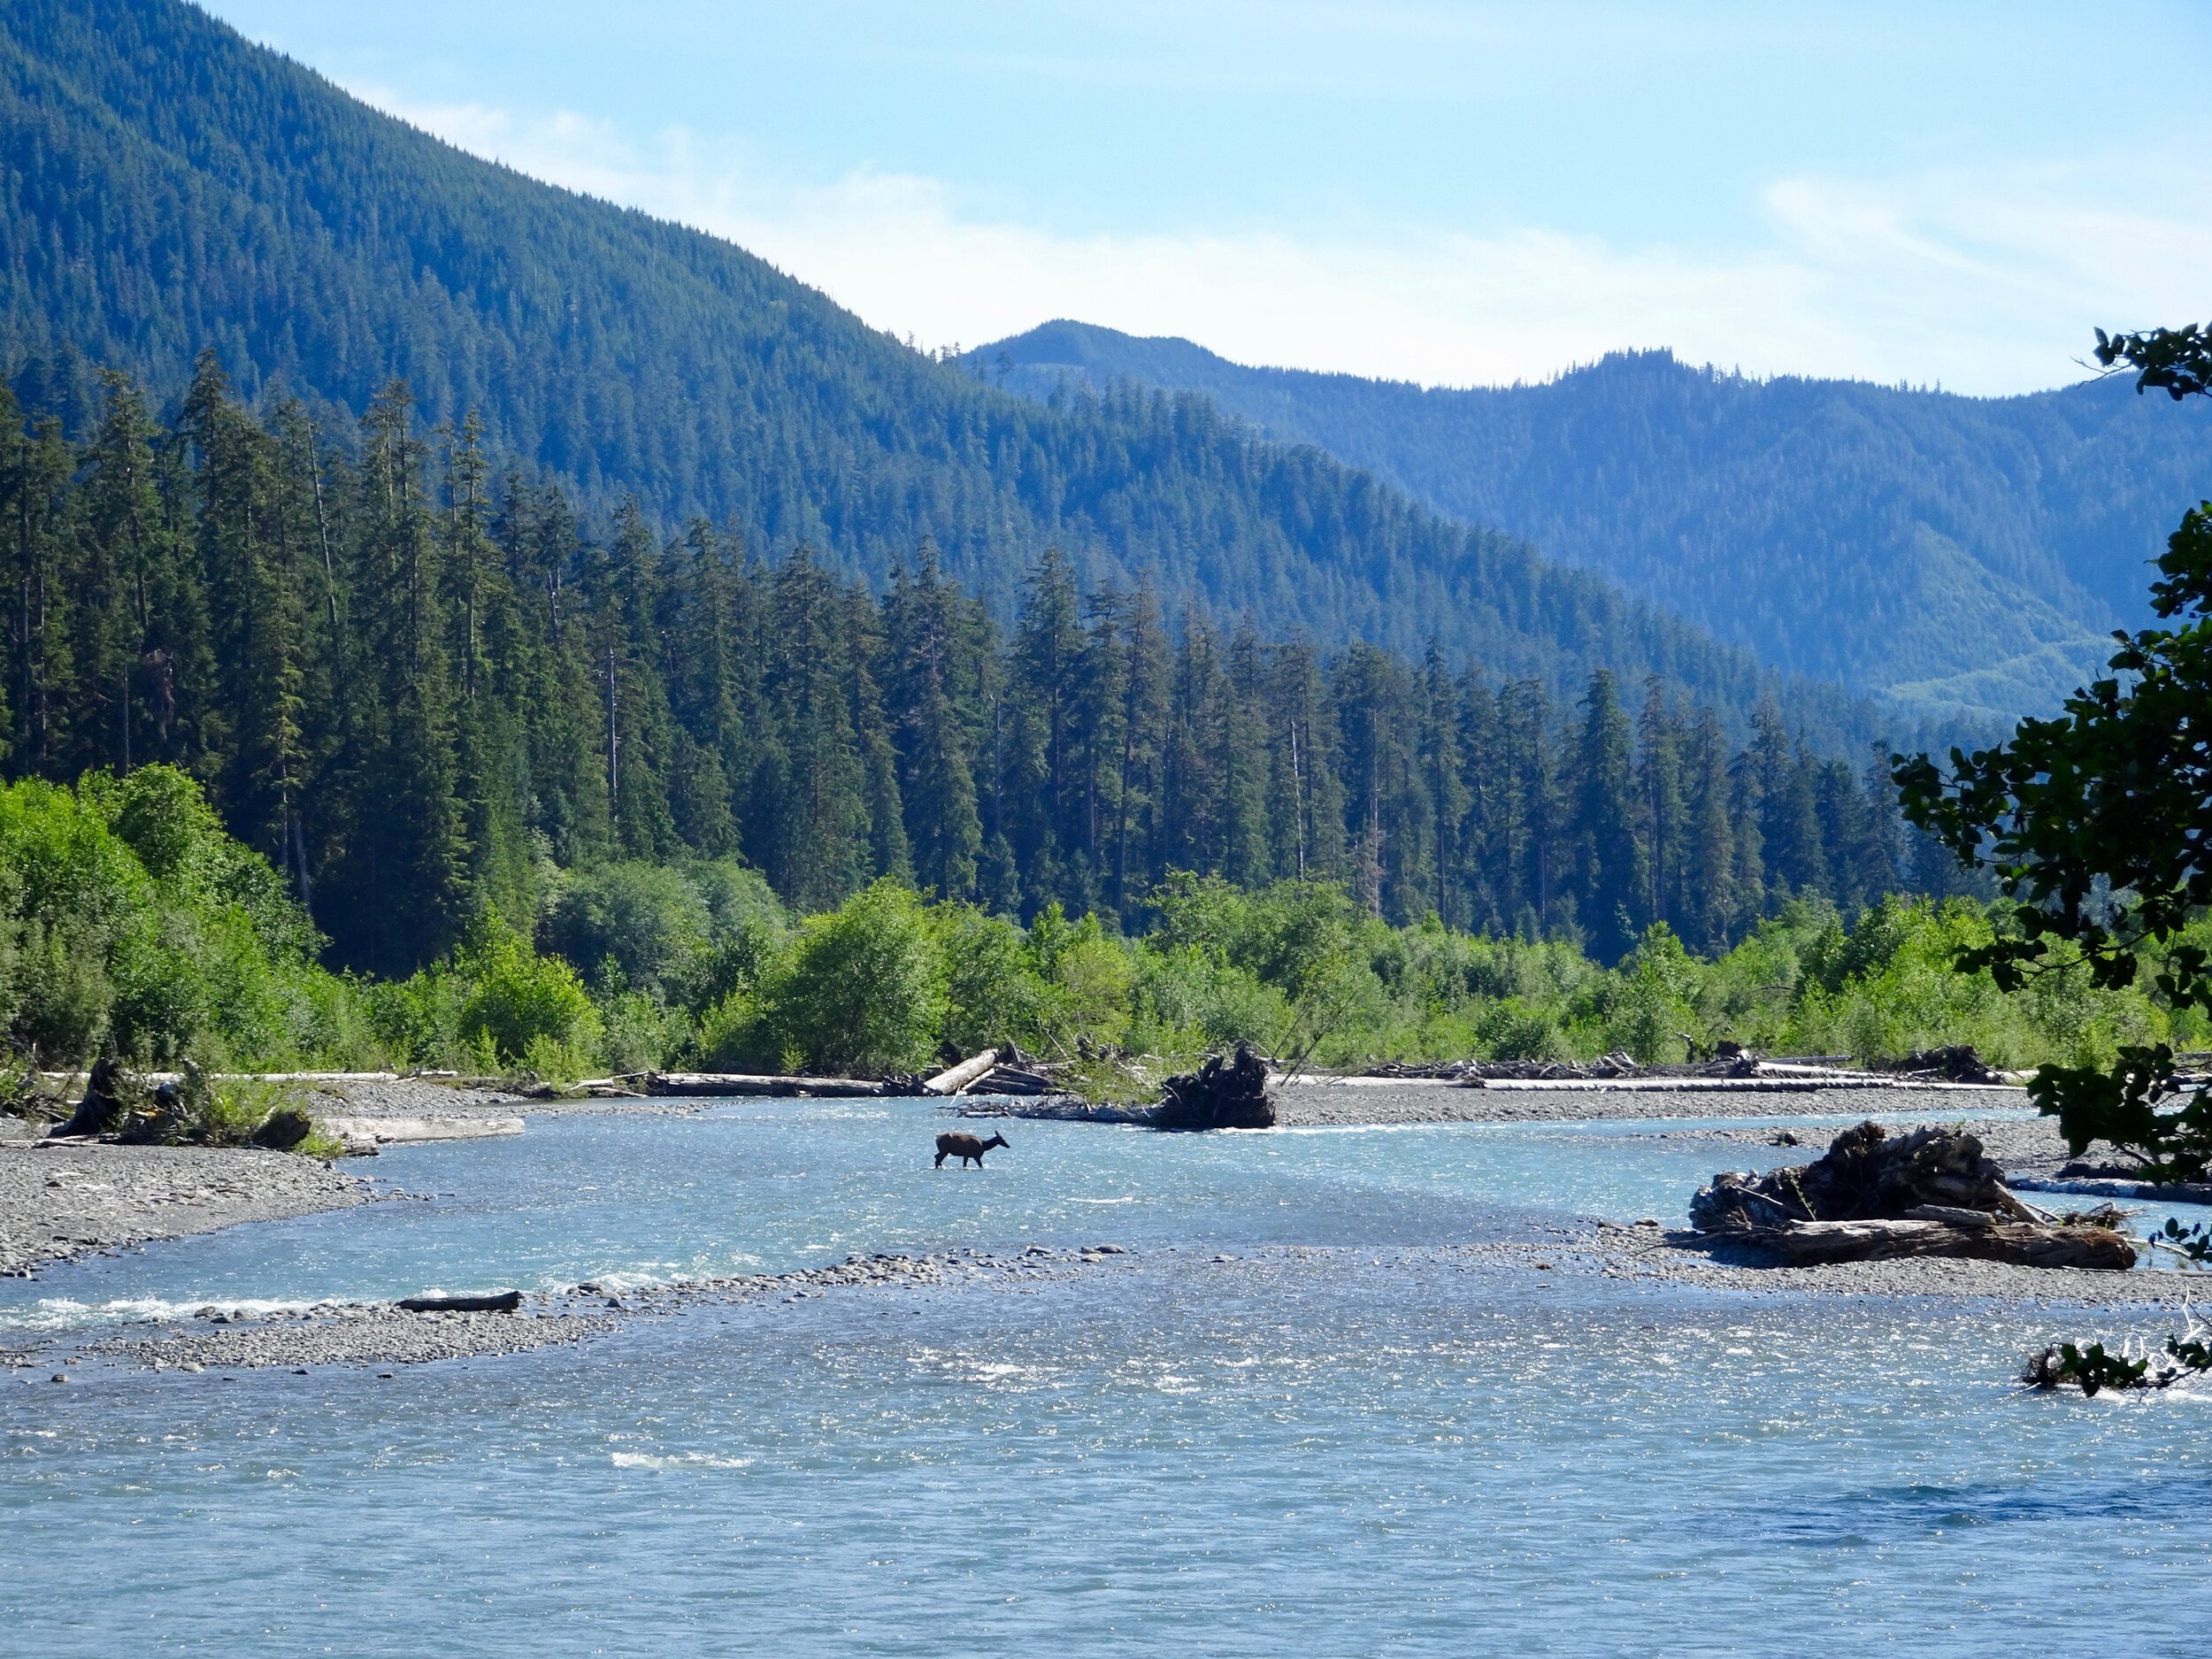 An elk crossing the river just outside the Hoh Rainforest.  Photo by Karen Boudreaux, June 17, 2021